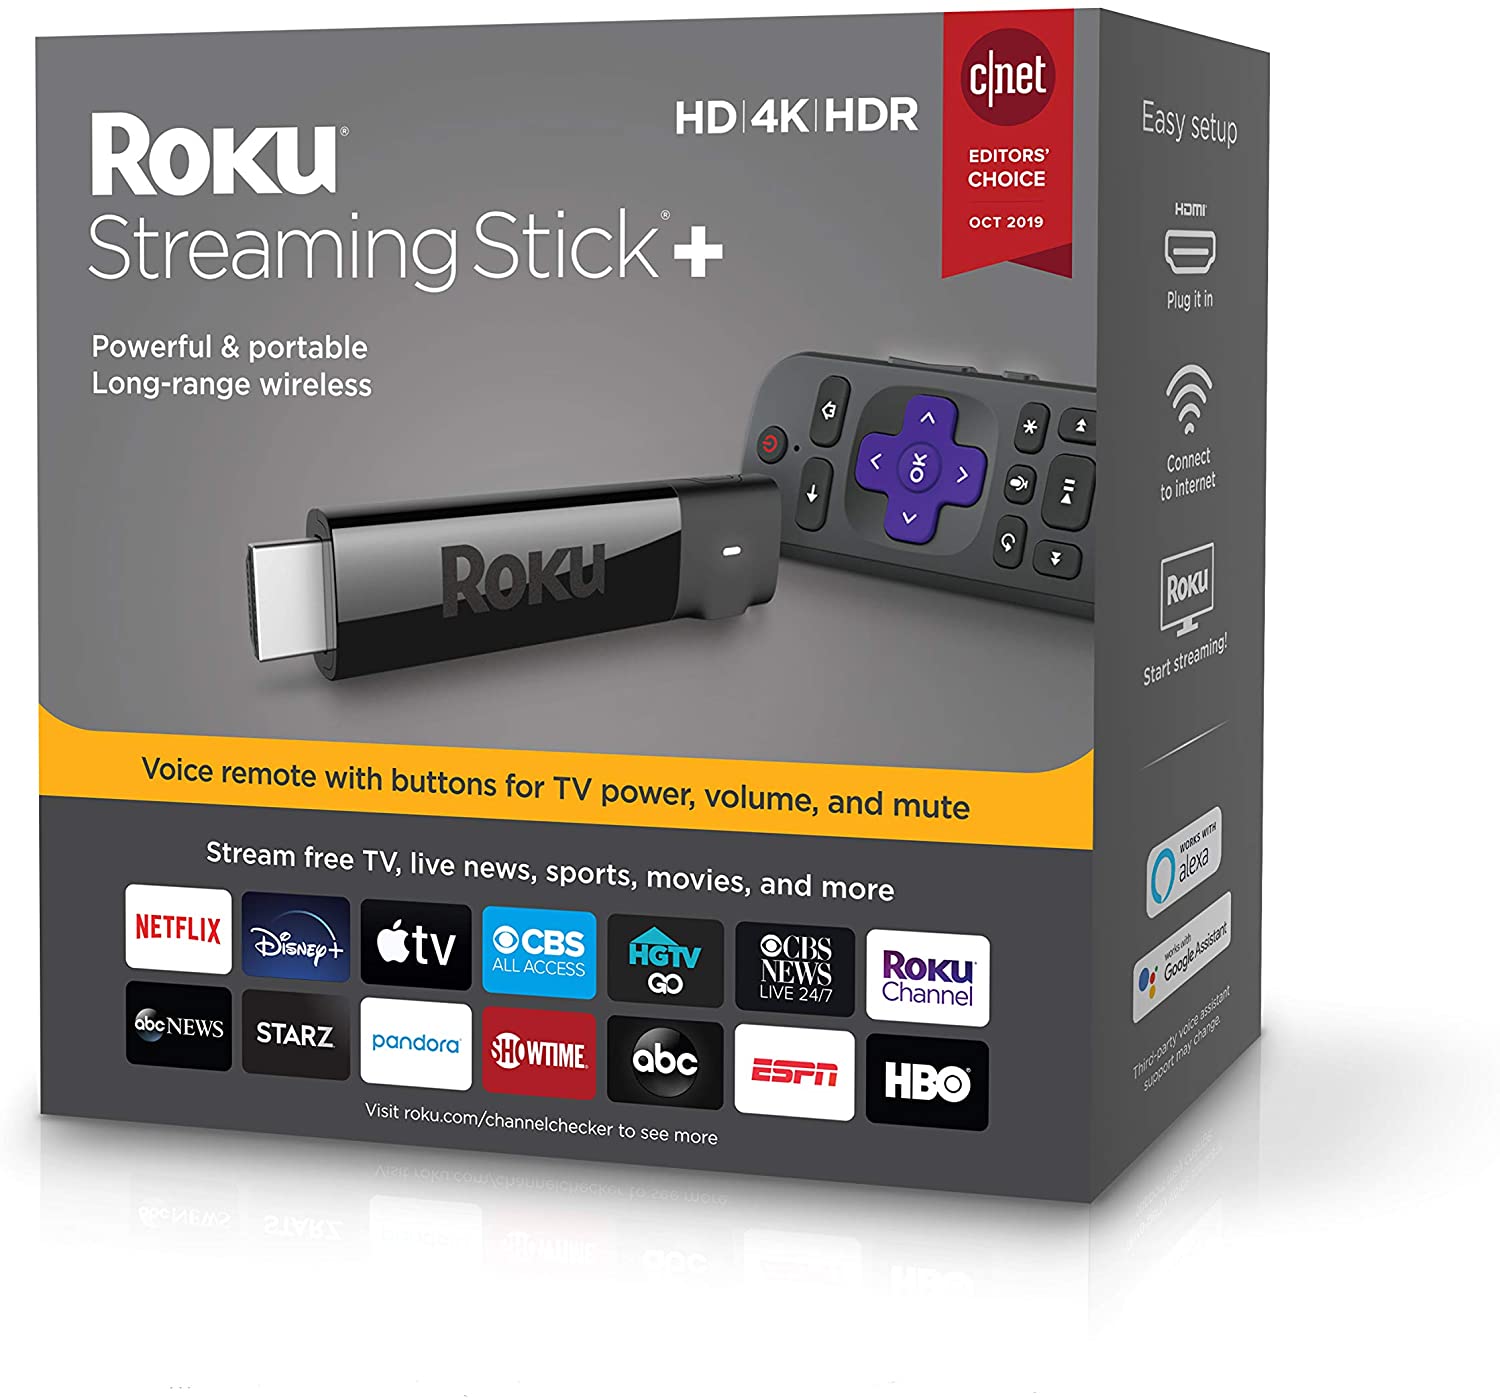 Roku Streaming Stick+ HD 4K HDR Streaming Device with Long-range Wireless and Voice Remote with TV Controls